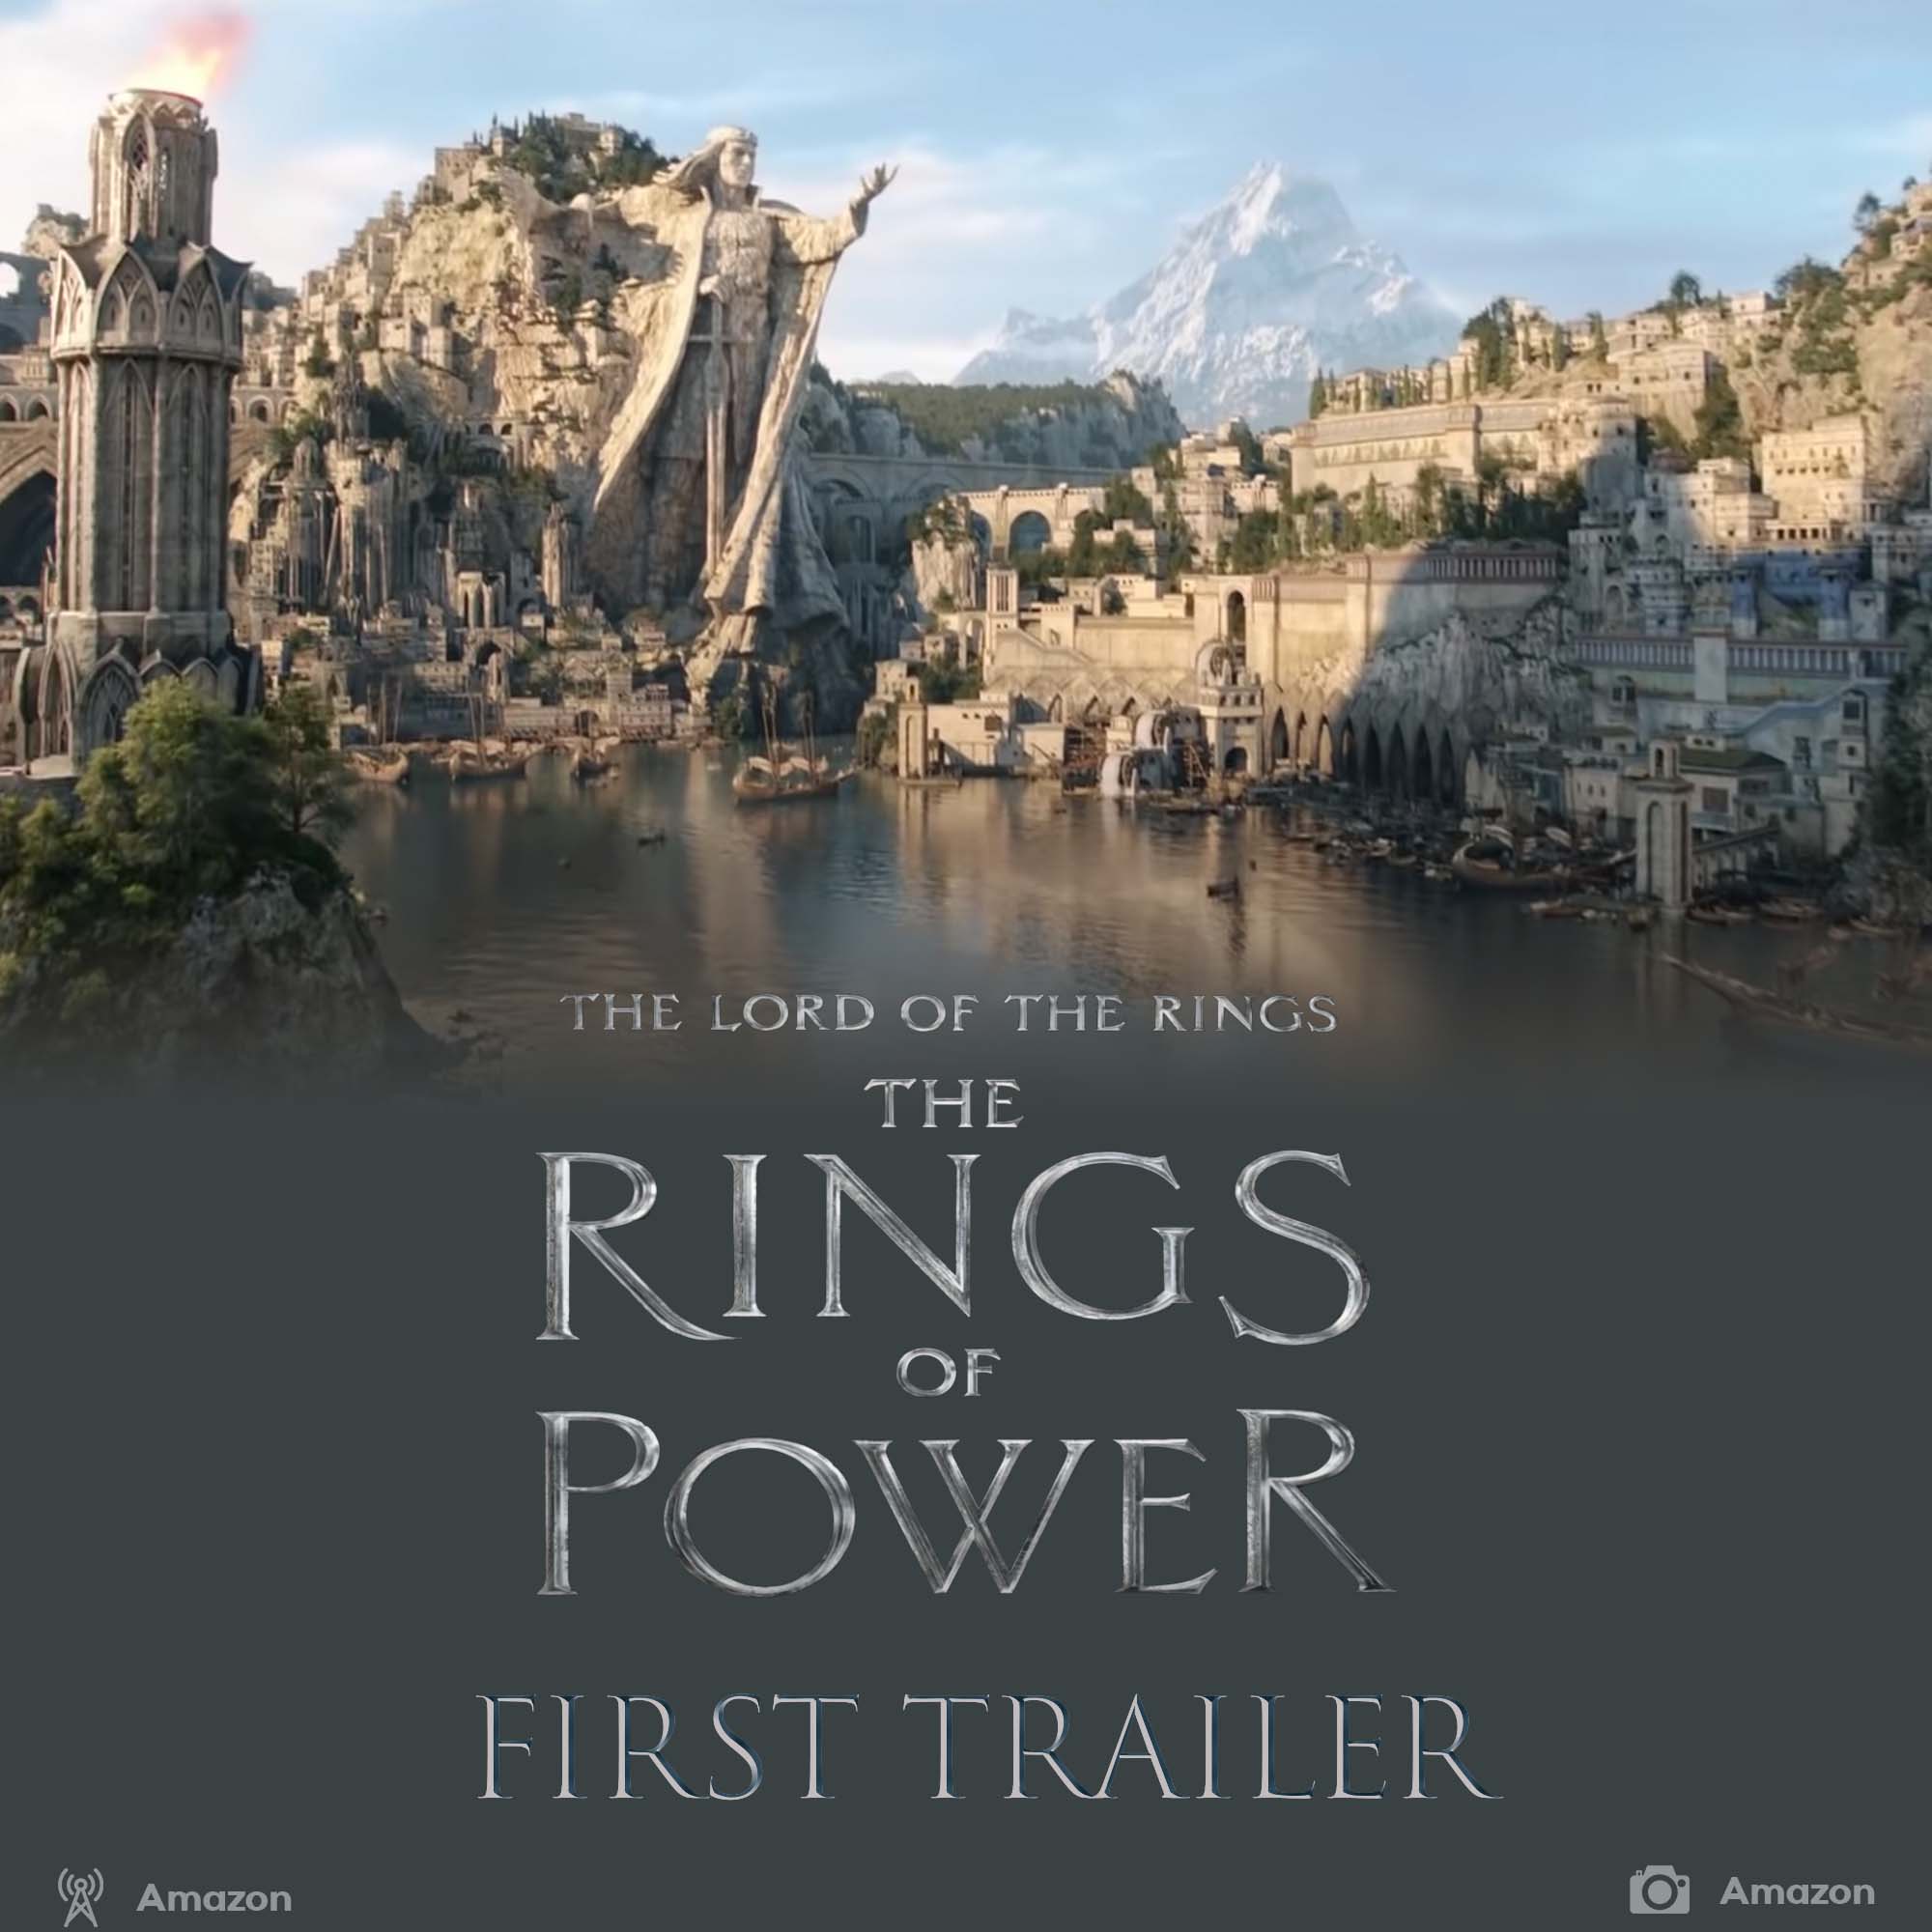 Lord of the Rings TV series trailer